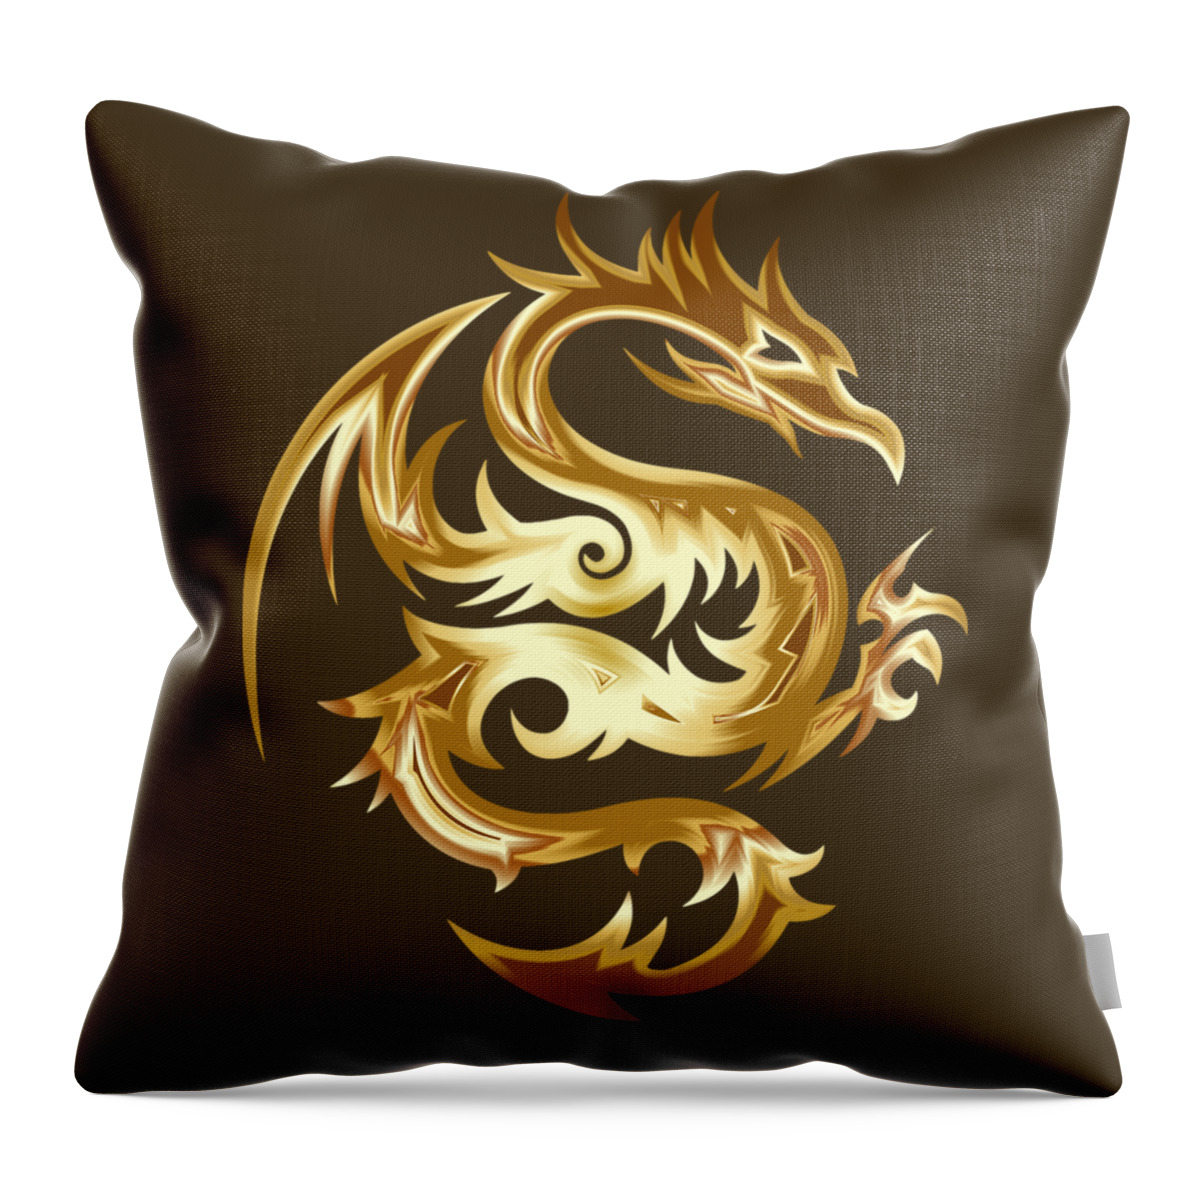 Dragon Throw Pillow featuring the photograph Dragon by Nancy Ayanna Wyatt